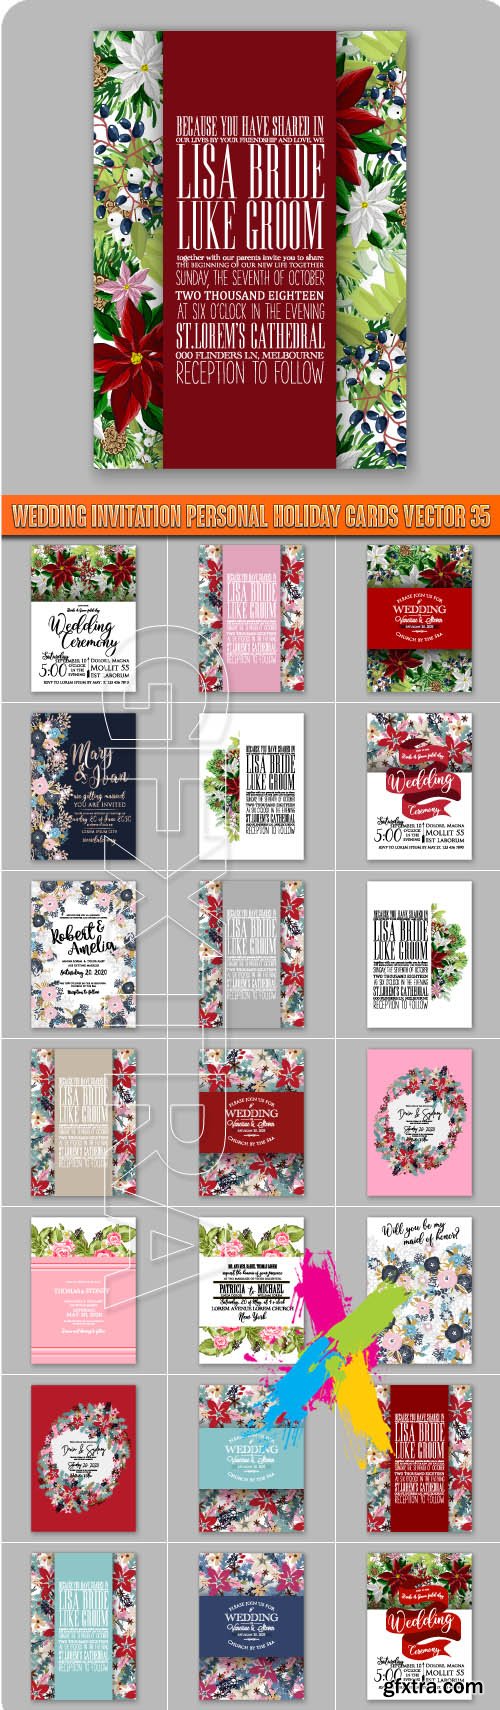 Wedding invitation personal holiday cards vector 35